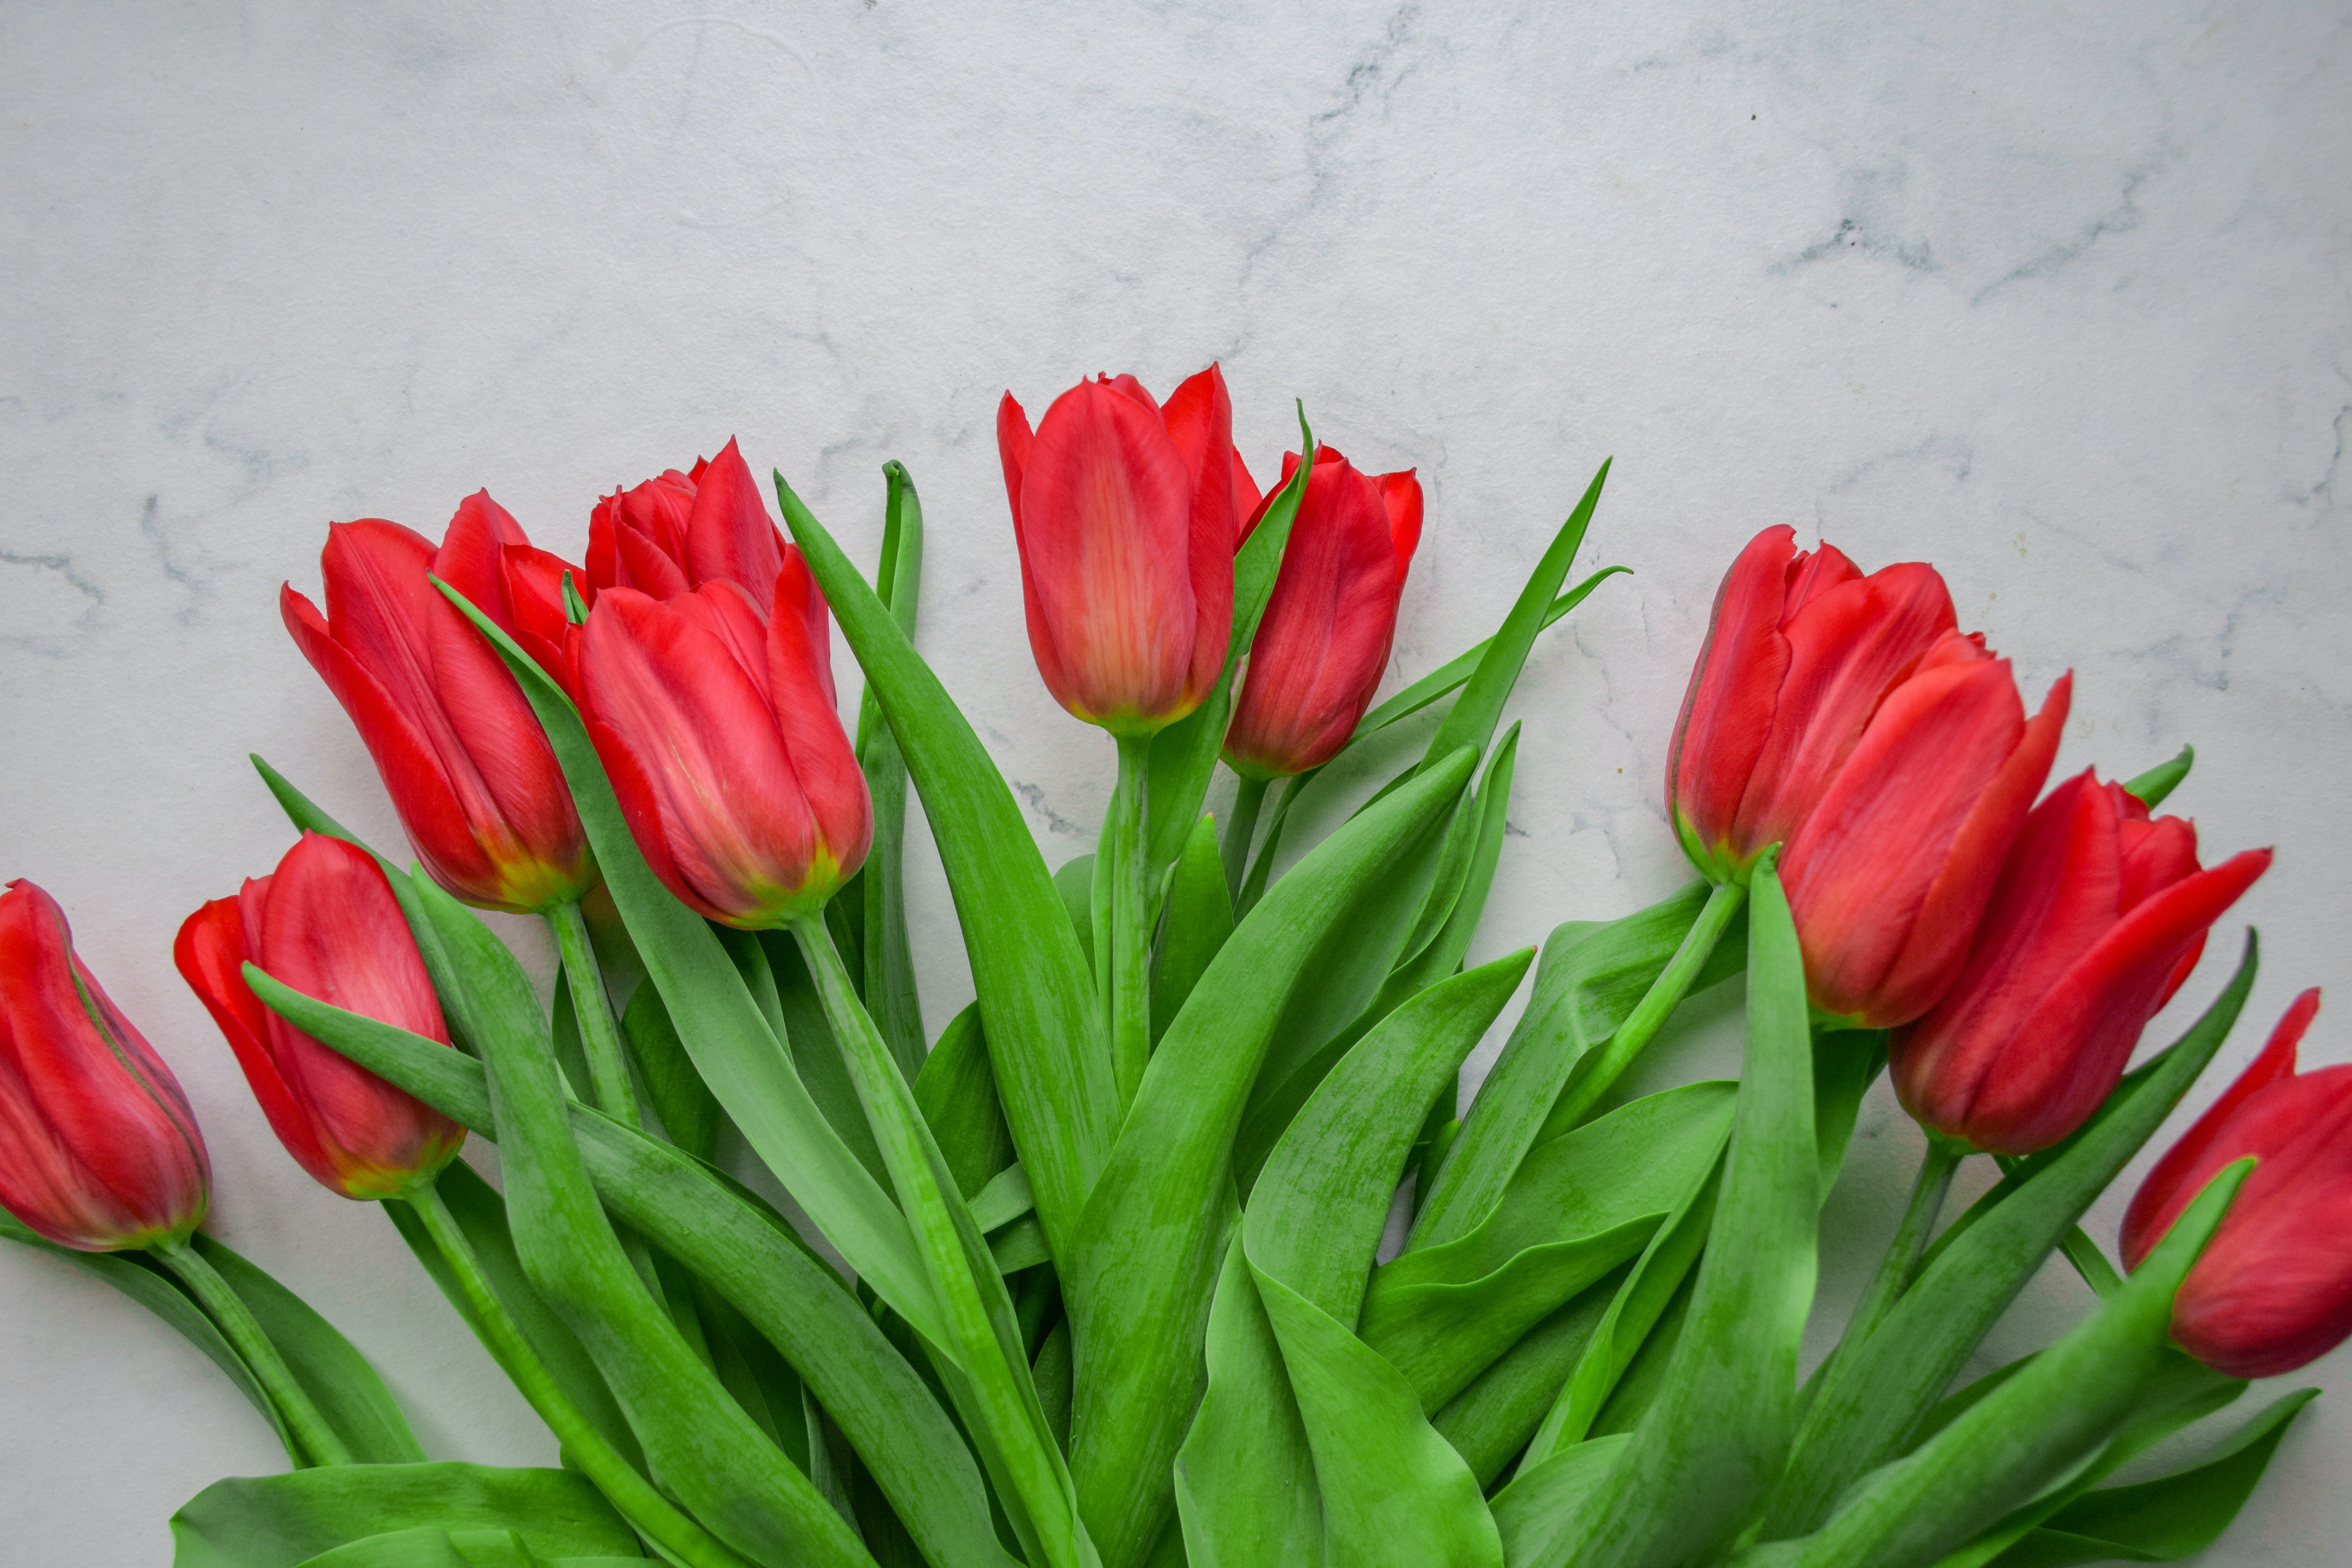 Hope and David placed the tulips on Claire's grave. | Source: Unsplash